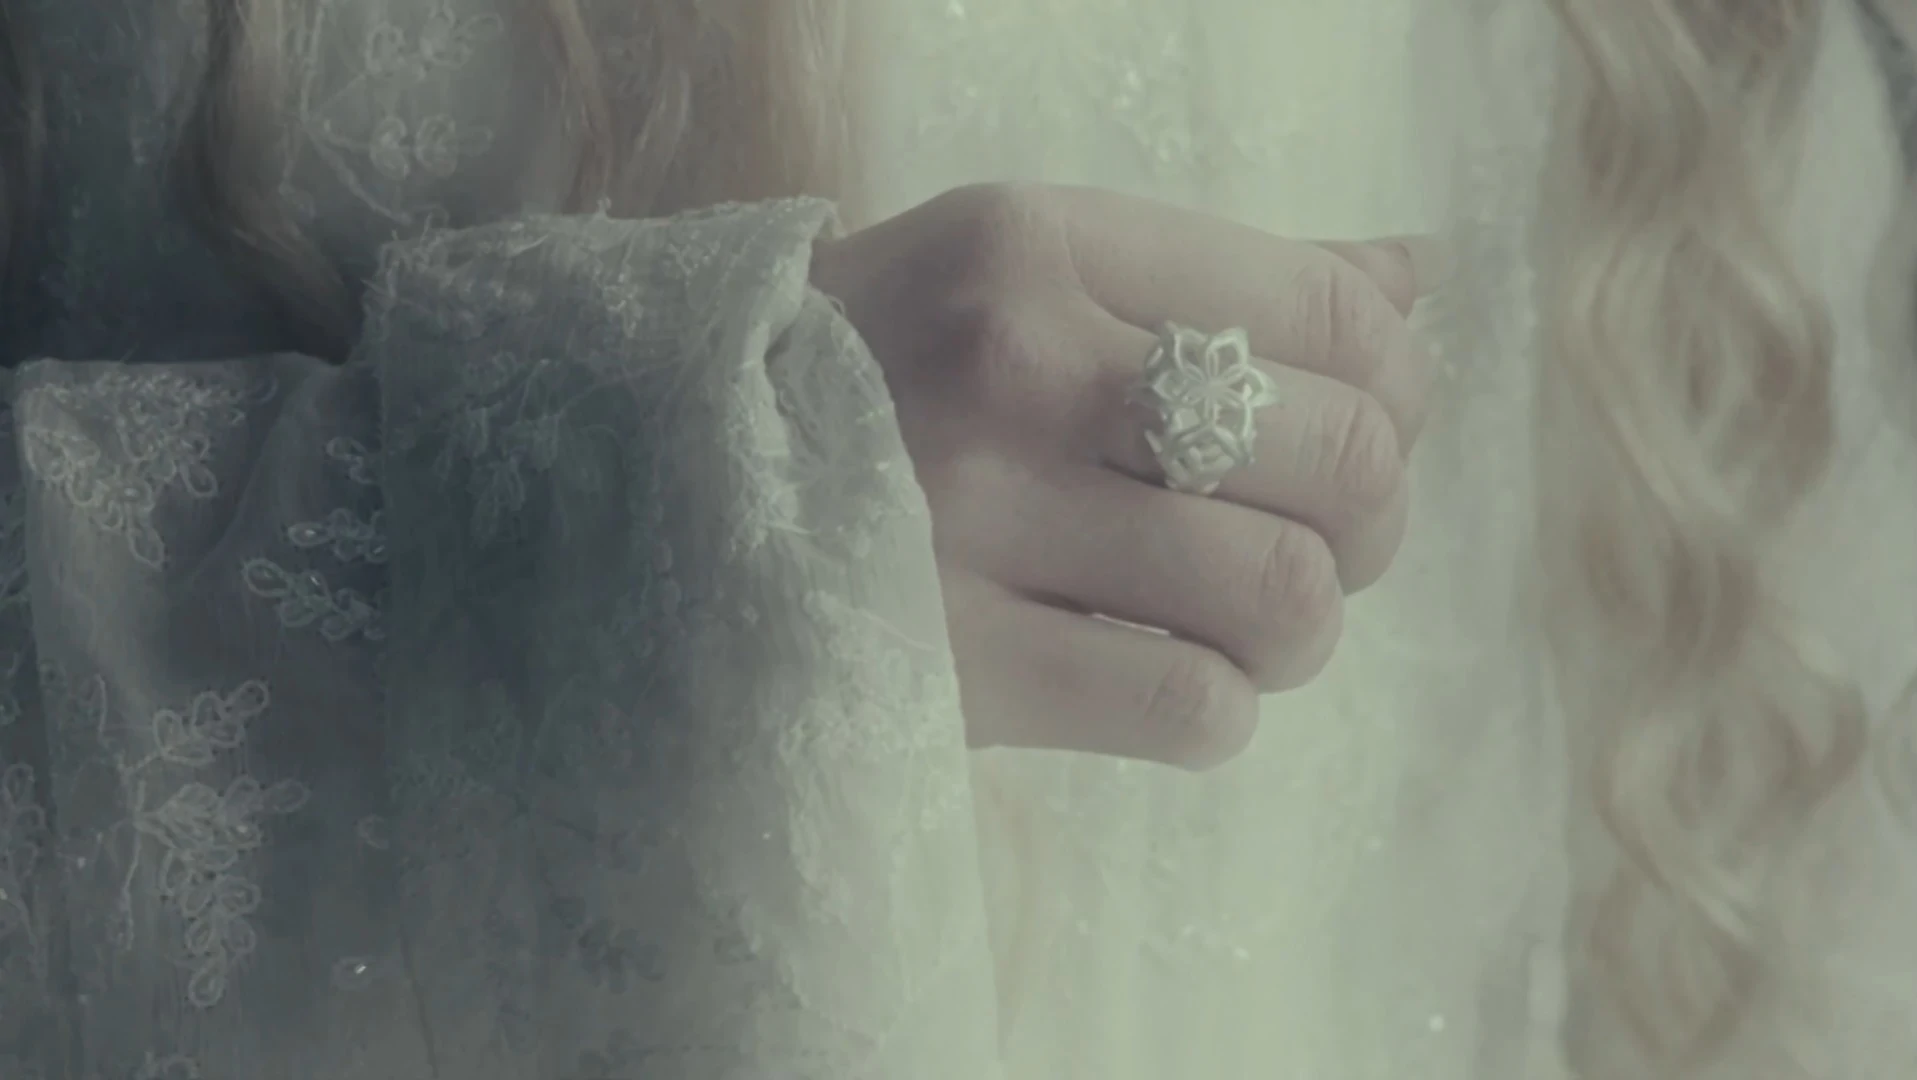 To show the ring that allows Galadriel the power to protect her people